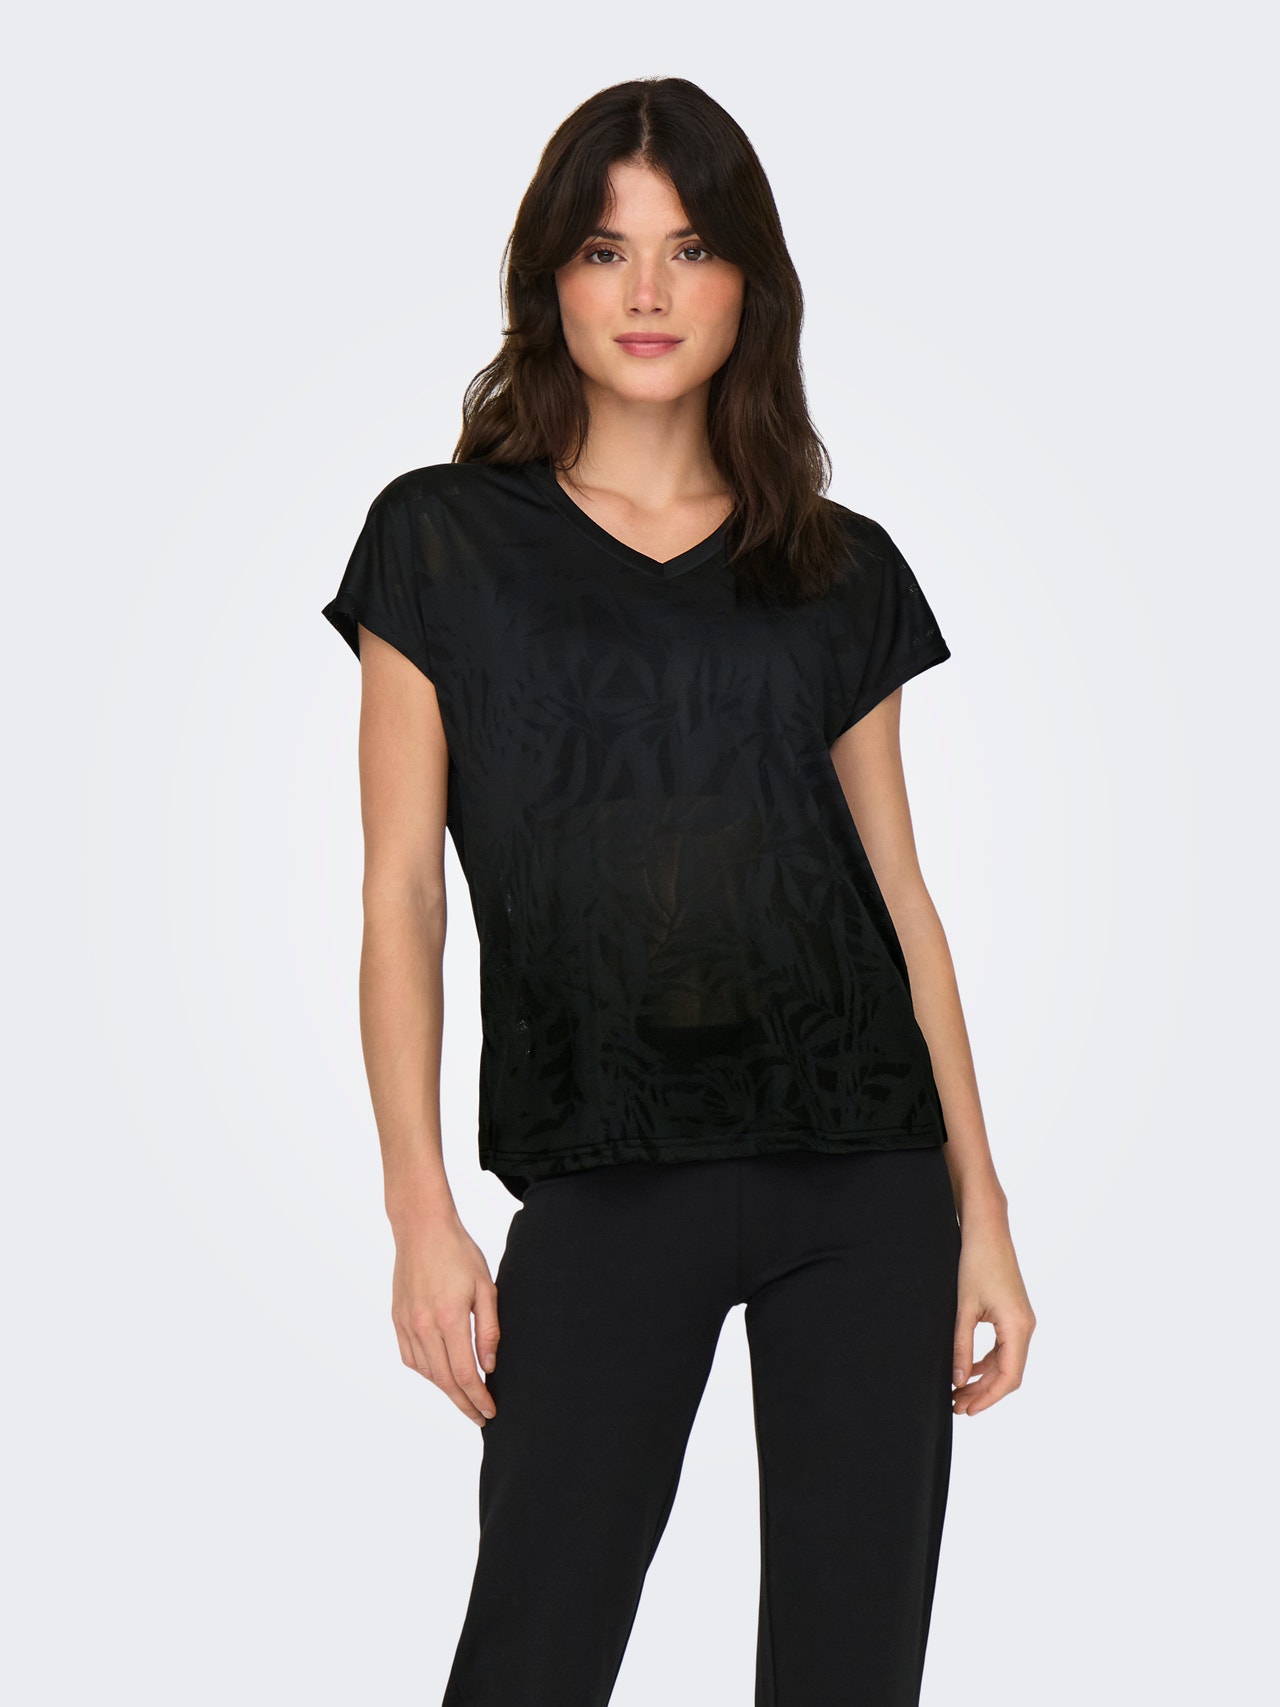 ONLY Batwing t-shirt -Black - 15318944